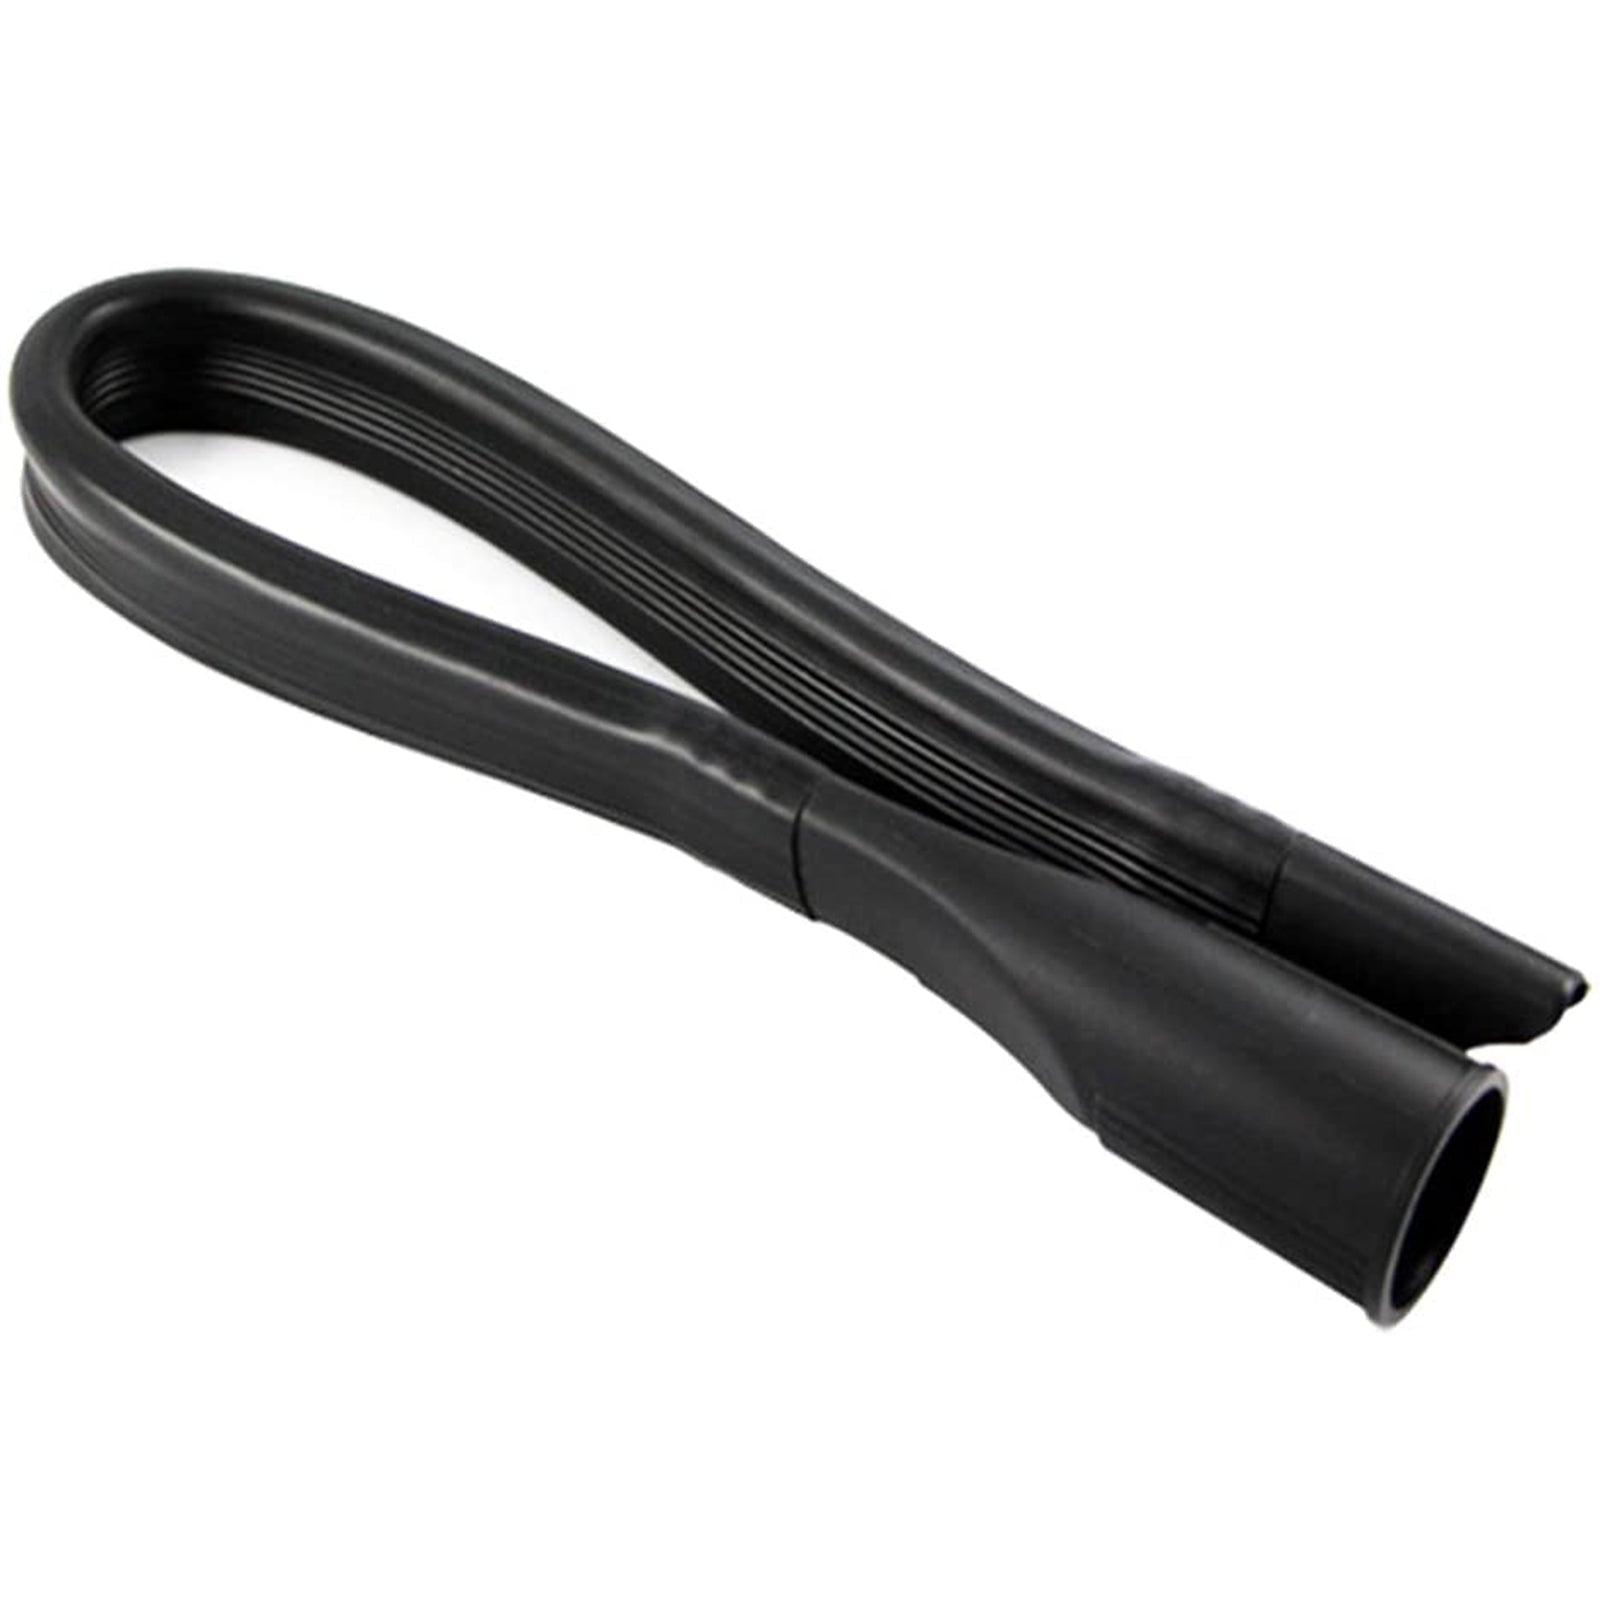 Flexible Crevice Tool Extra Long compatible with VAX Vacuum Cleaner (32mm)